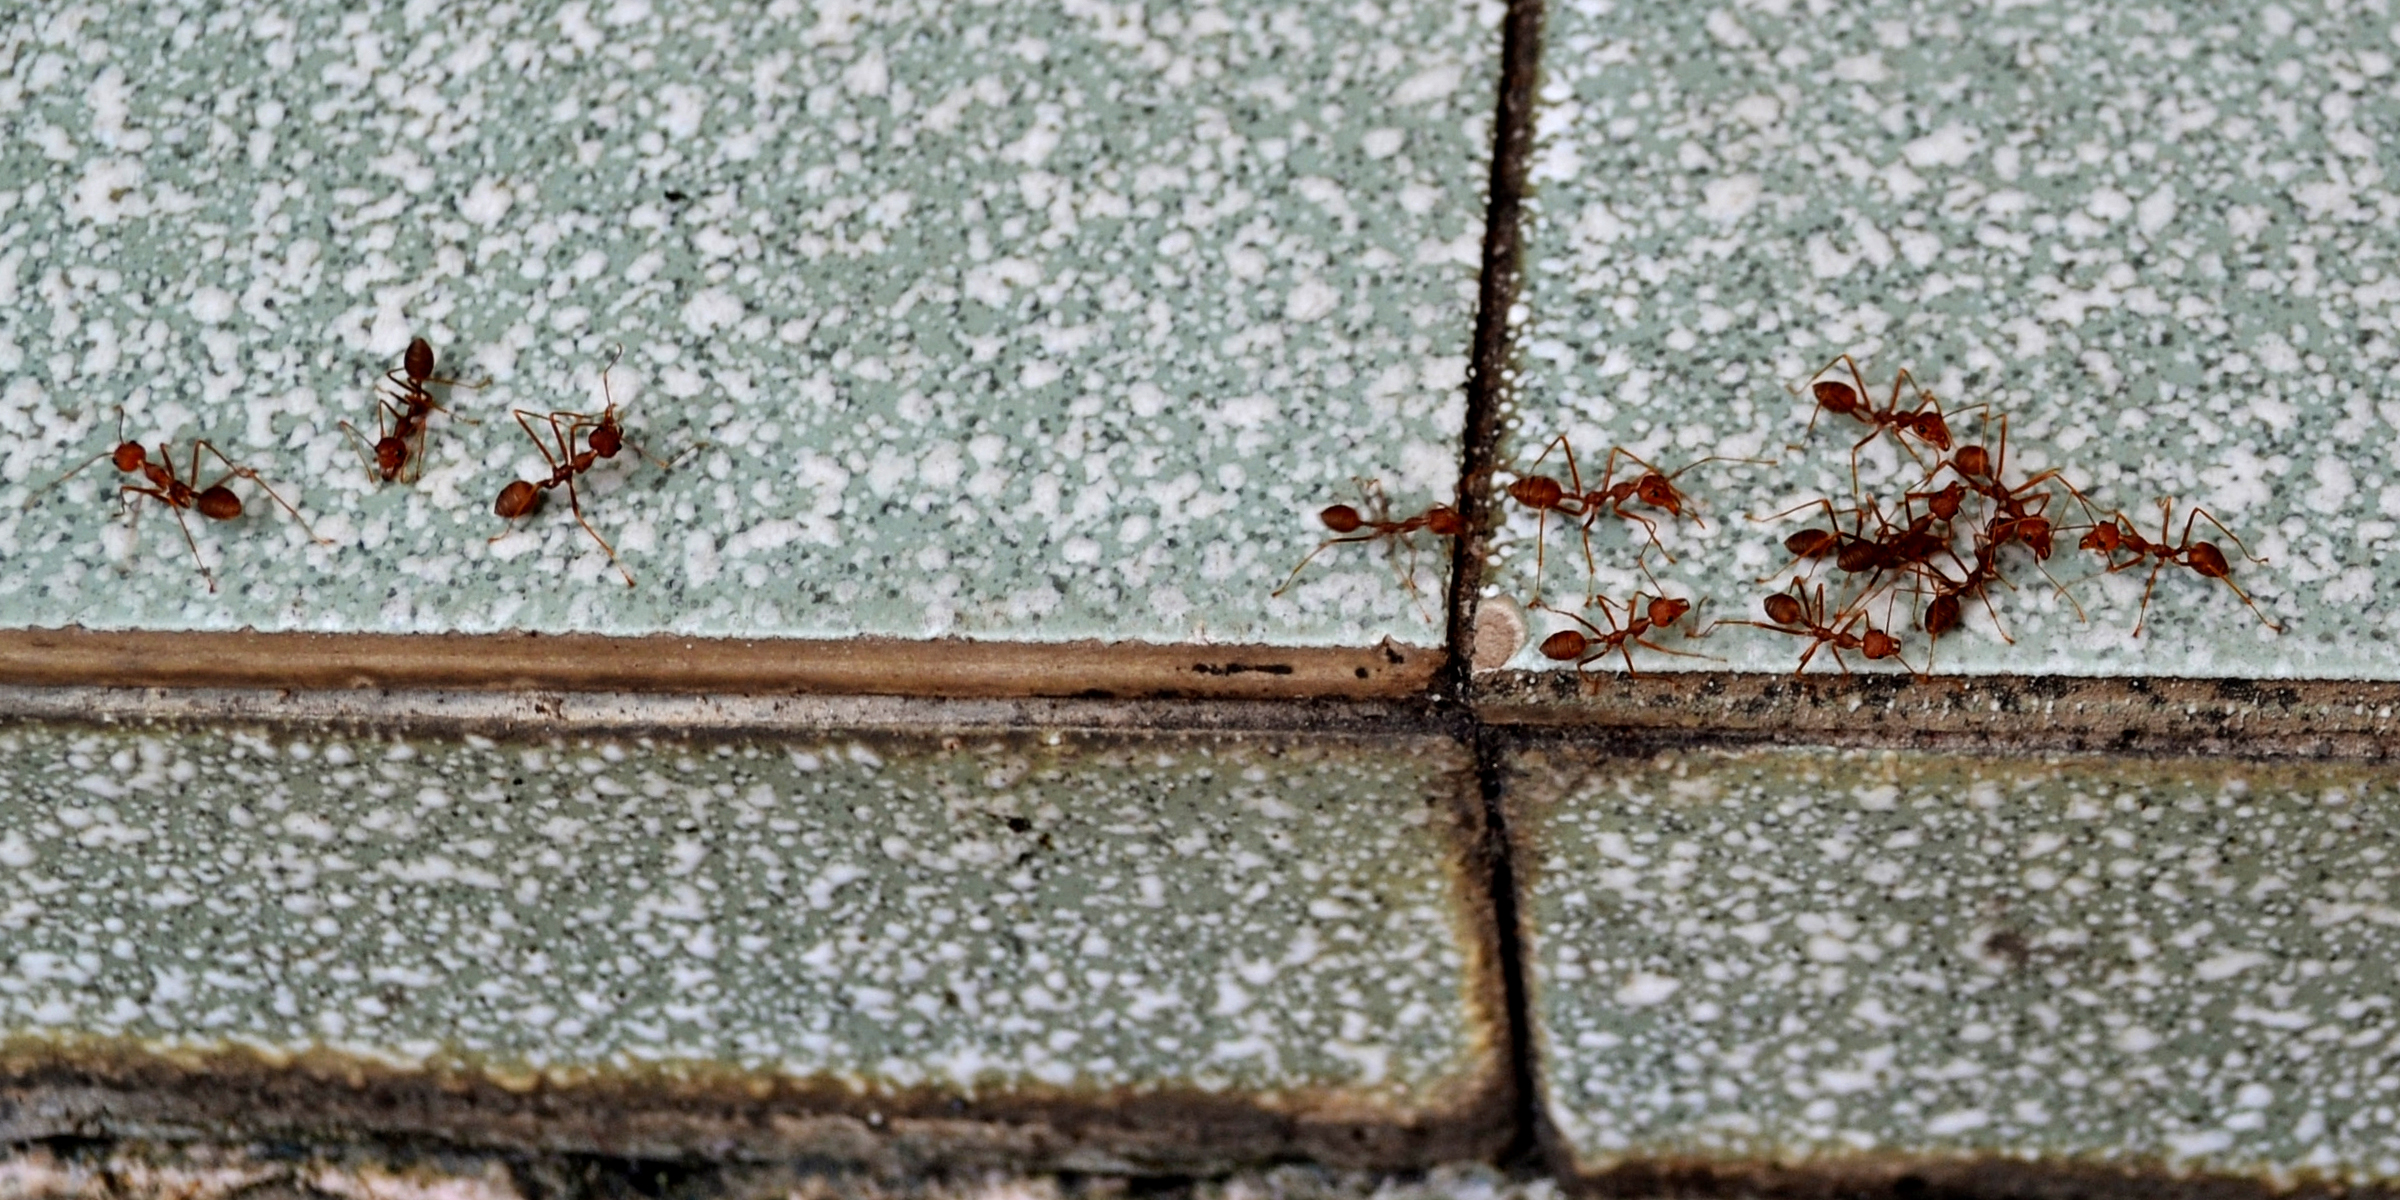 A group of ants | Source: Shutterstock